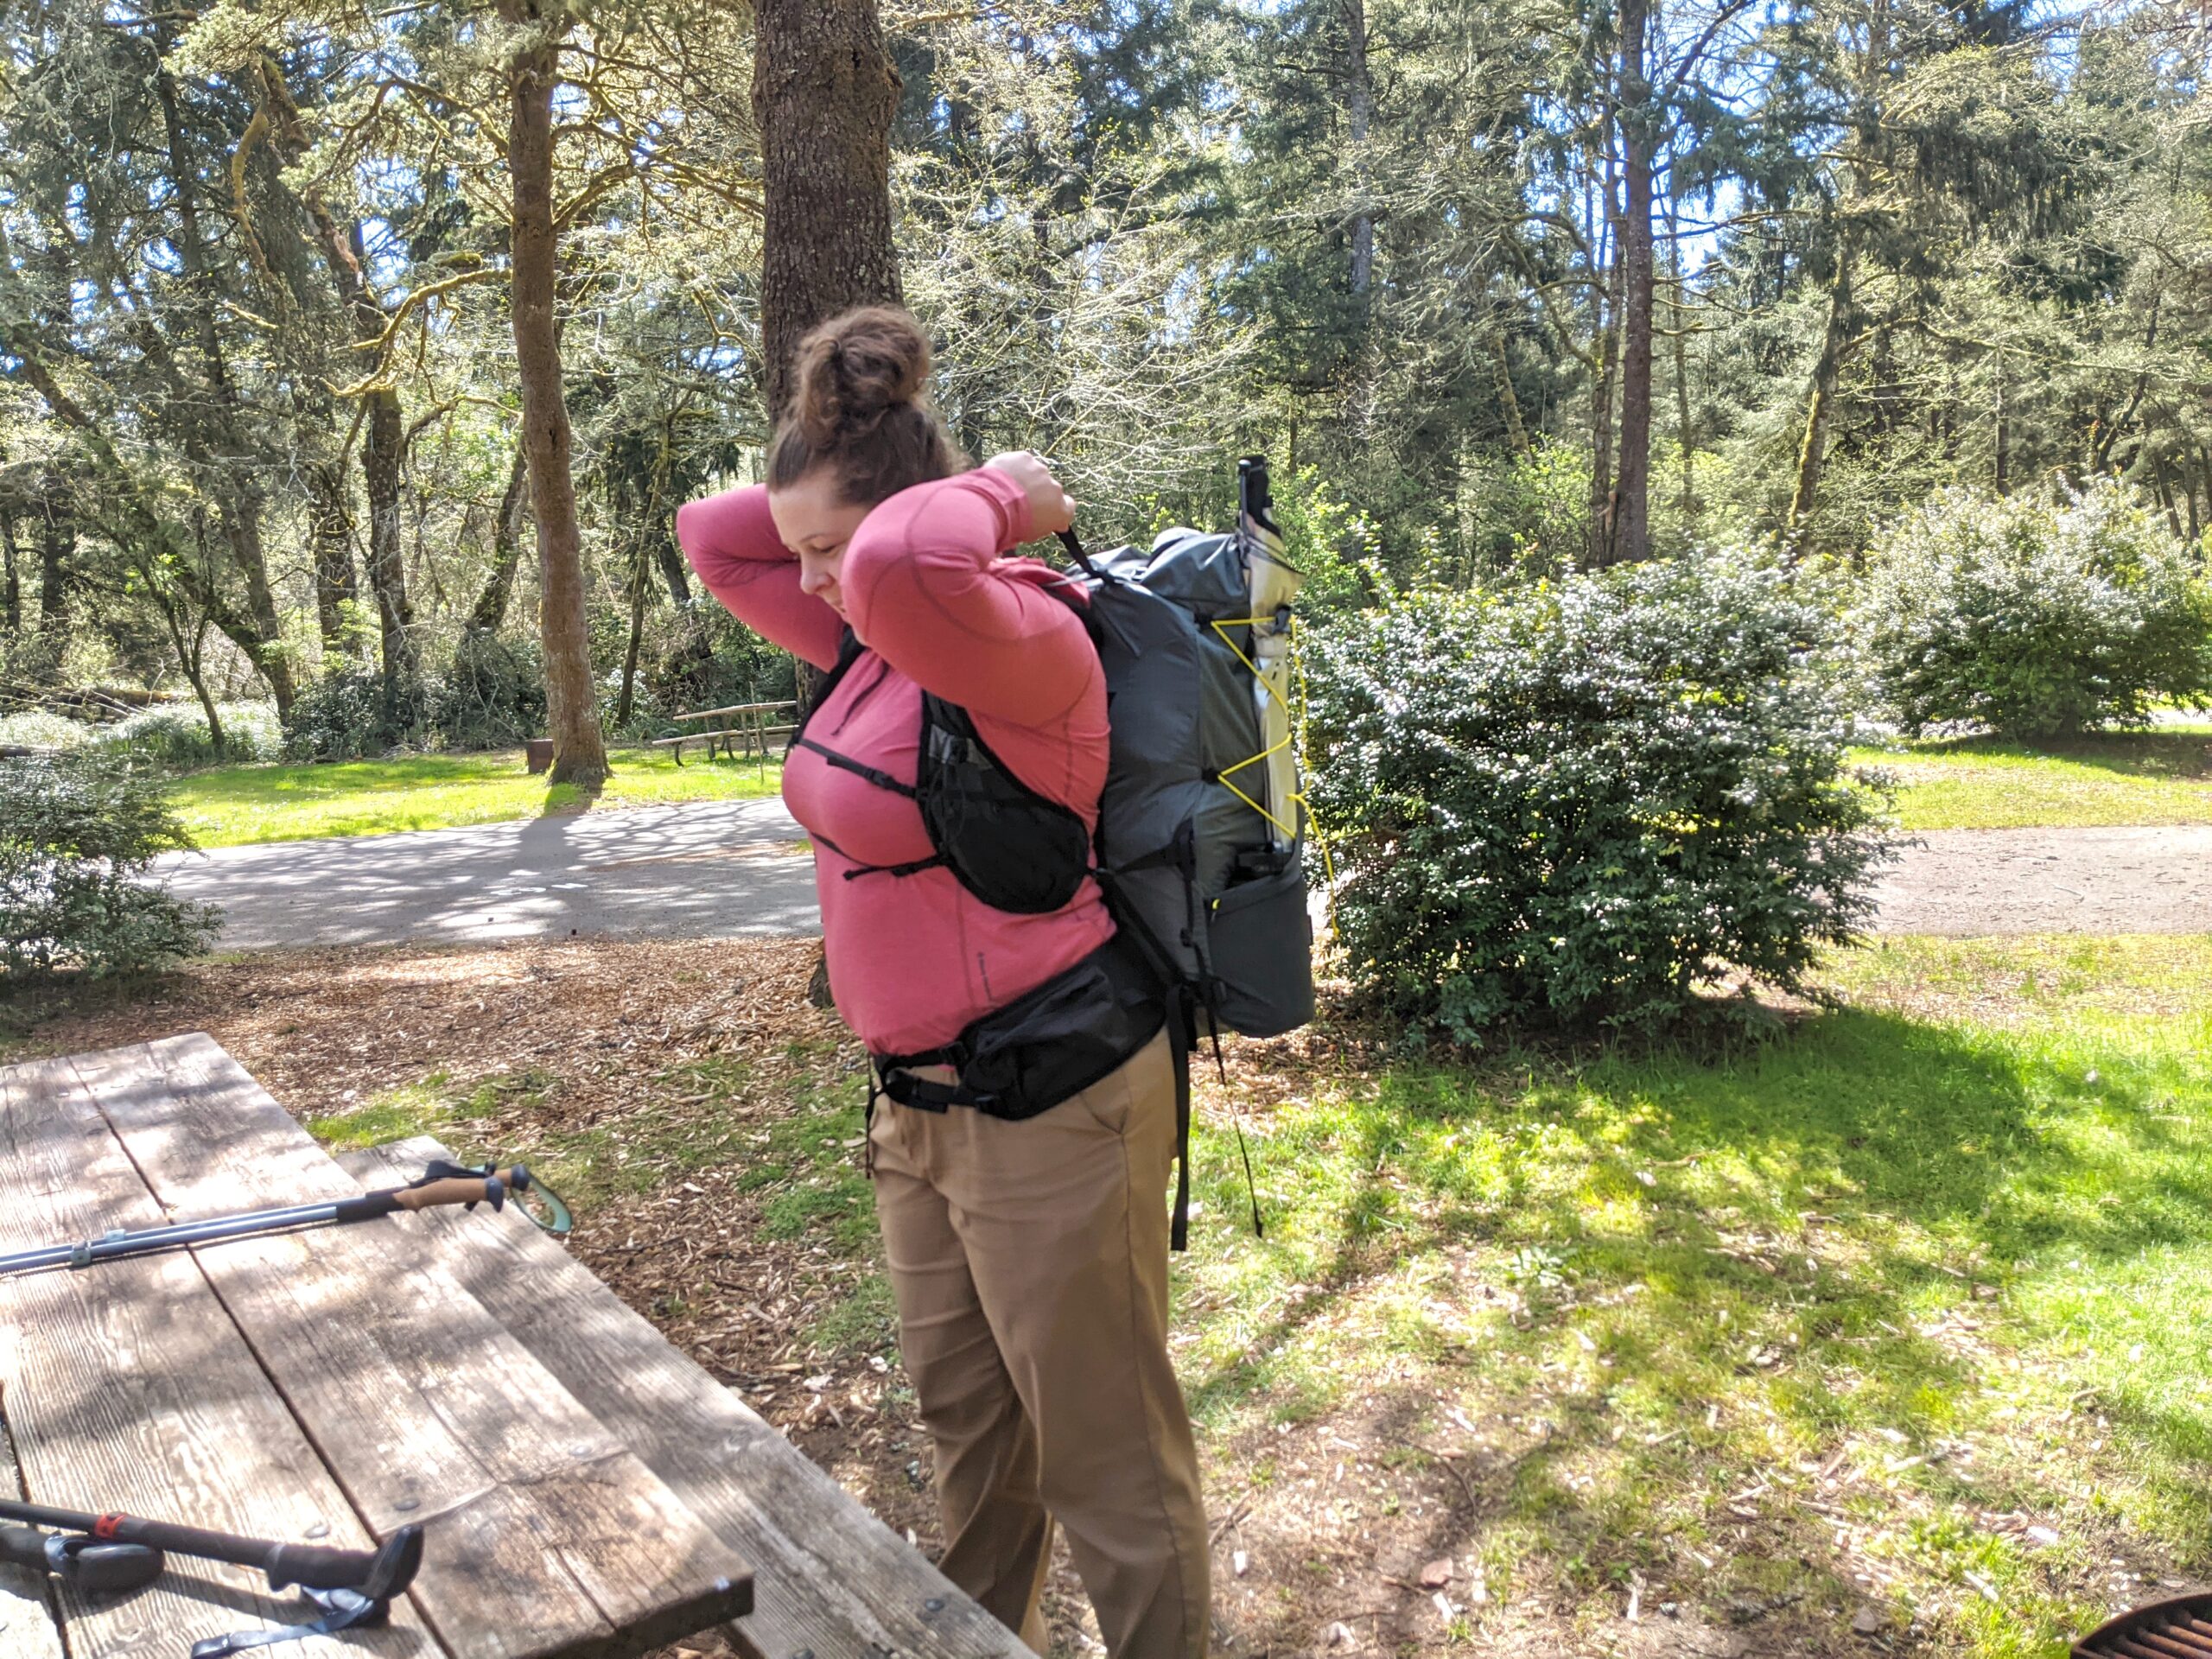 Learning to adjust the straps on the Six Moons Designs Swift X was a steep learning curve for one, but once our traditional backpack tester got the hang of it, she was impressed by how comfortable the fit was.